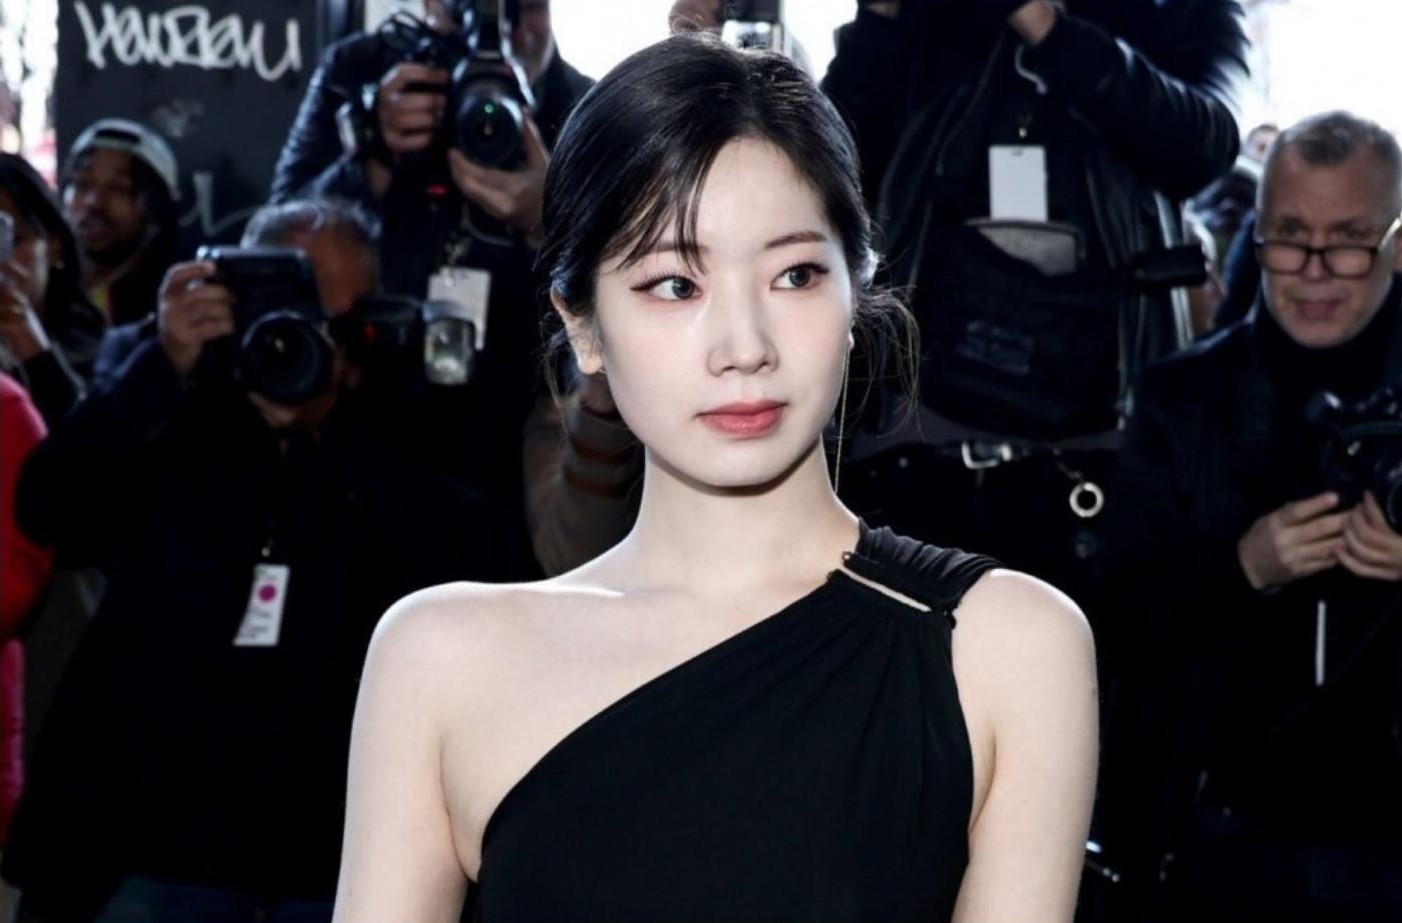 TWICE Dahyun makes people sigh over her look at New York Fashion Week: “Destroyed, yes or no?